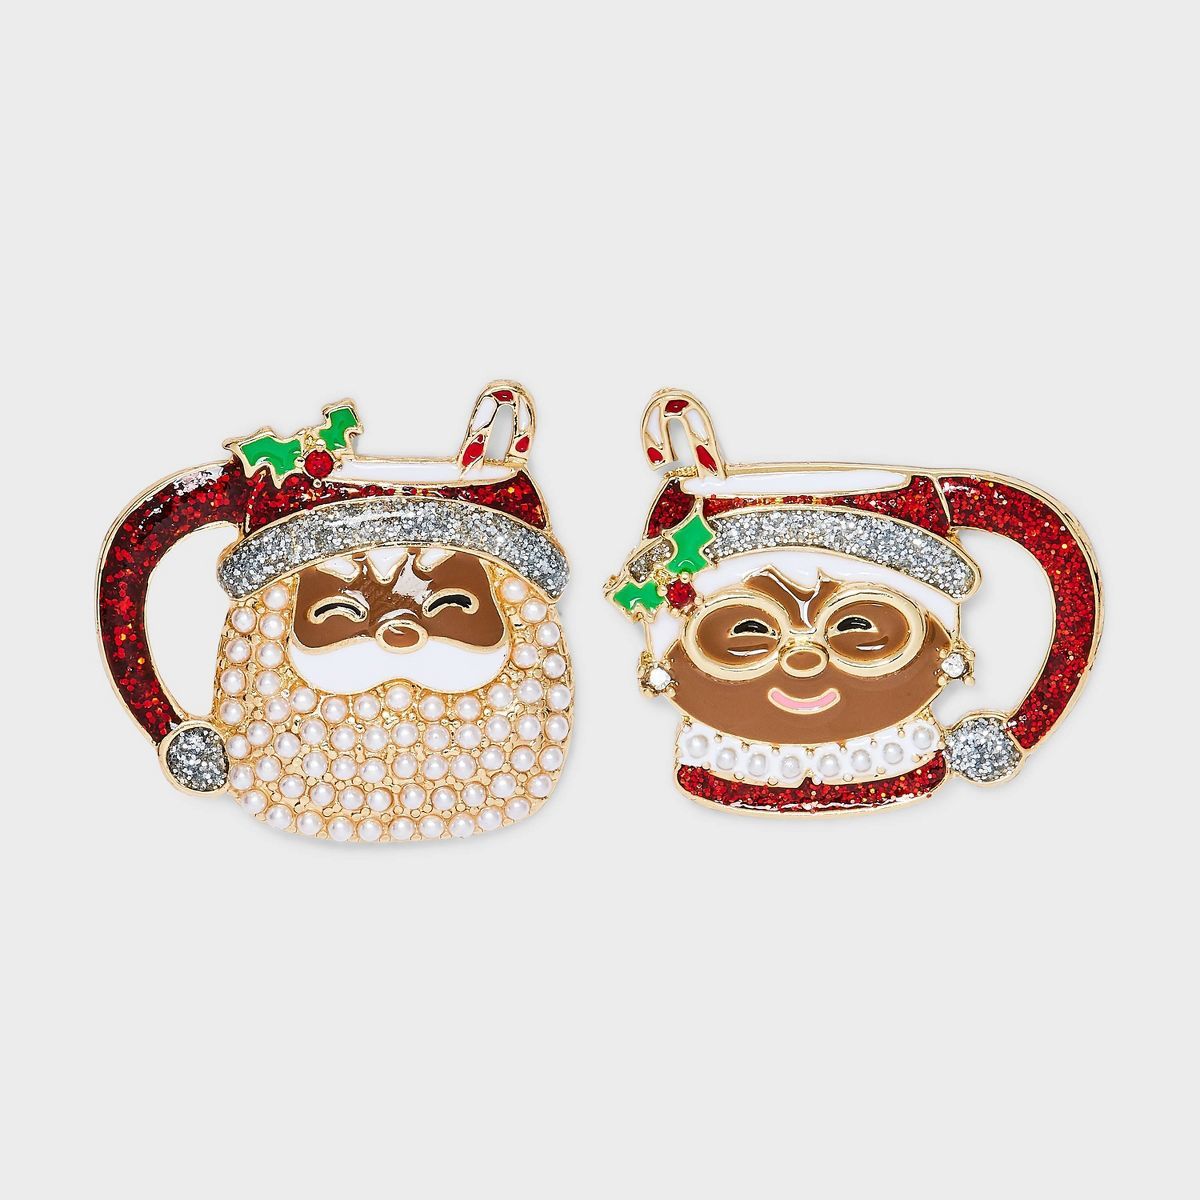 SUGARFIX by BaubleBar "Cup Of Cheer" Statement Earrings | Target